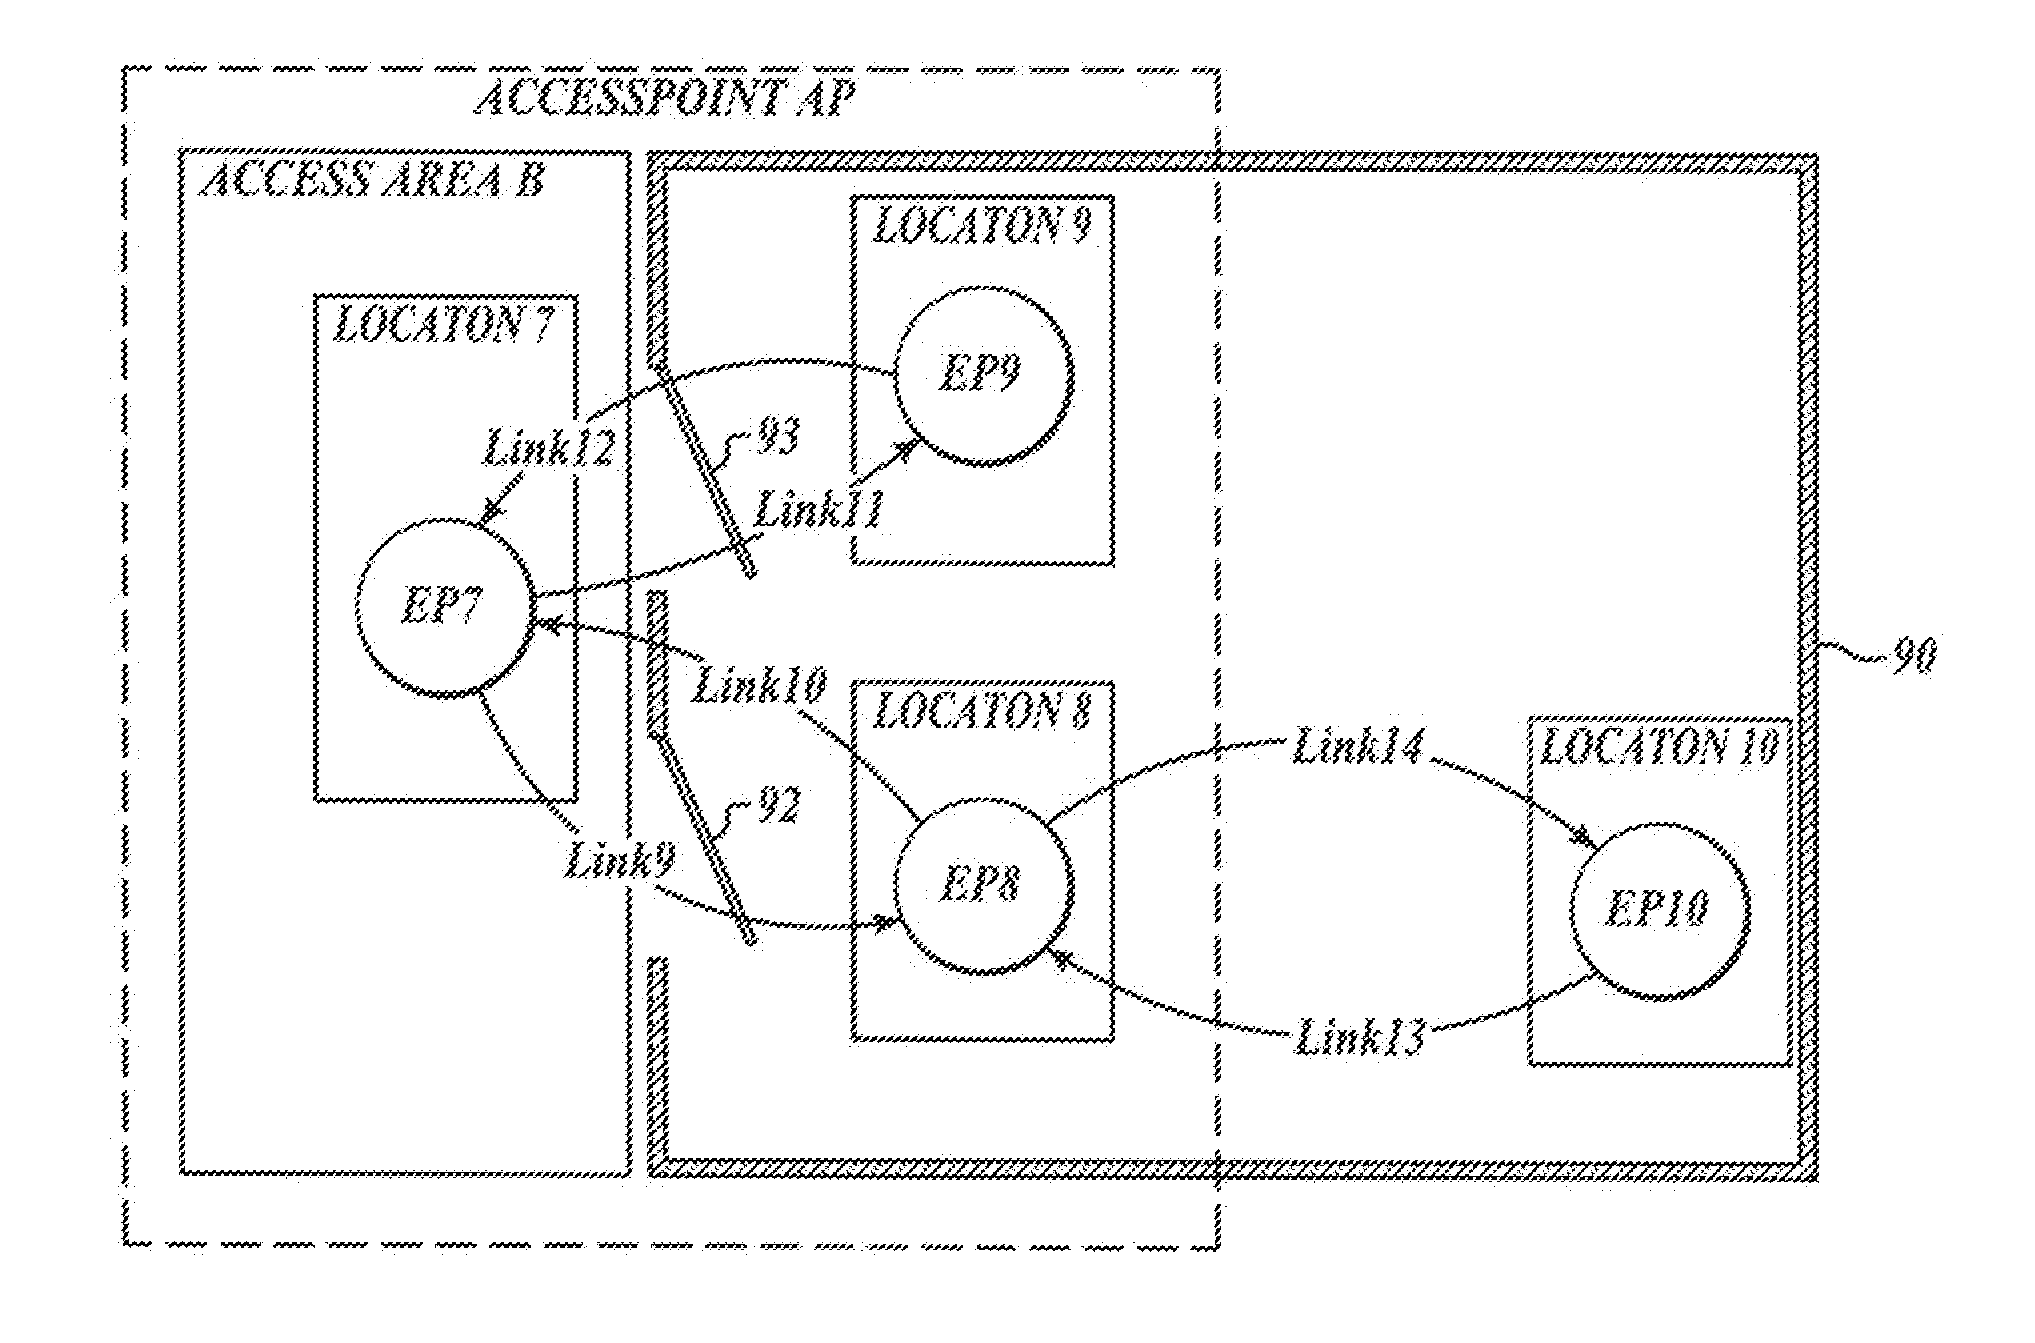 Systems and methods for object localization and path identification based on RFID sensing